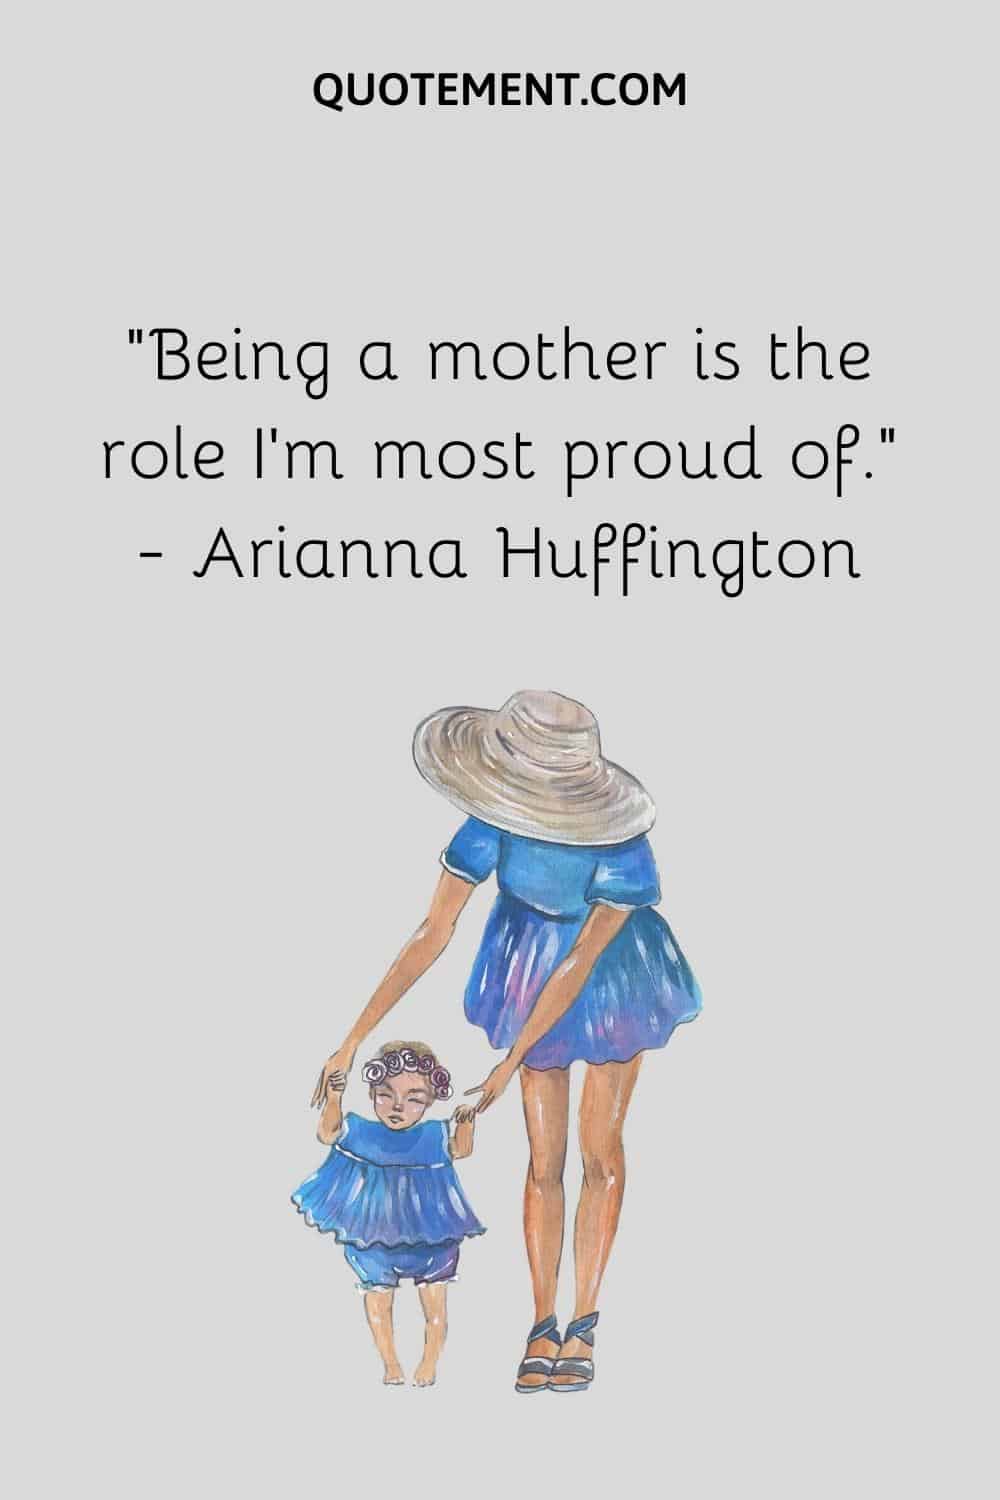 “Being a mother is the role I’m most proud of.” — Arianna Huffington